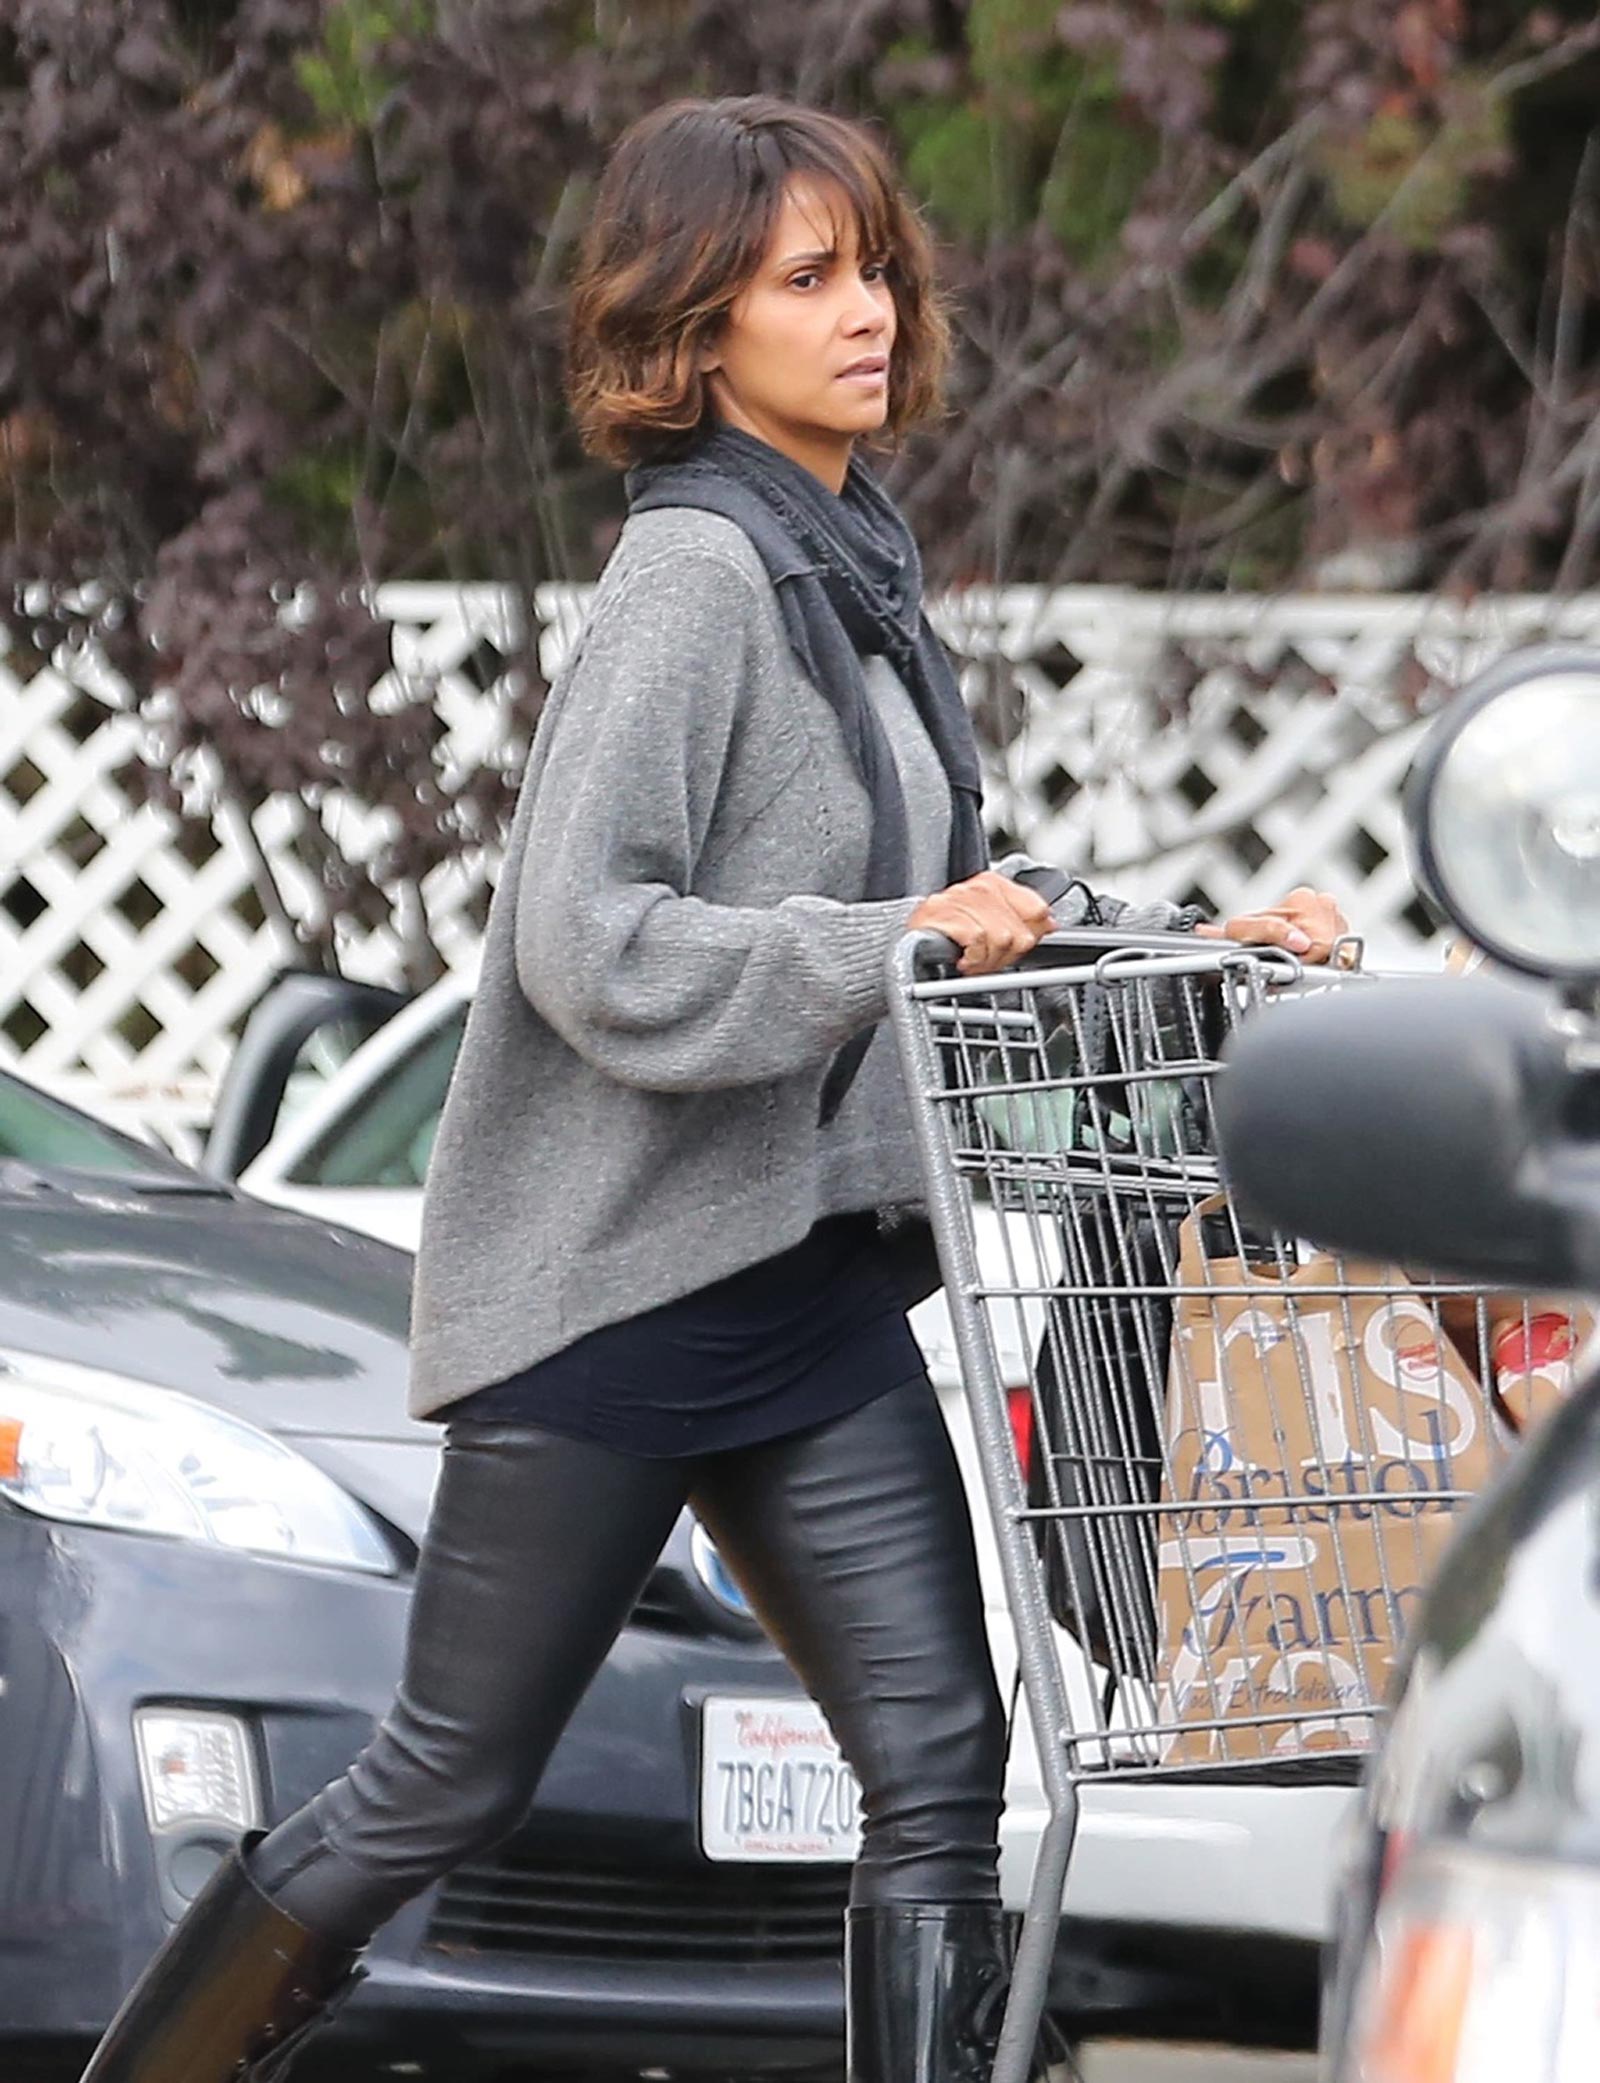 Halle Berry shops at Bristol Farms